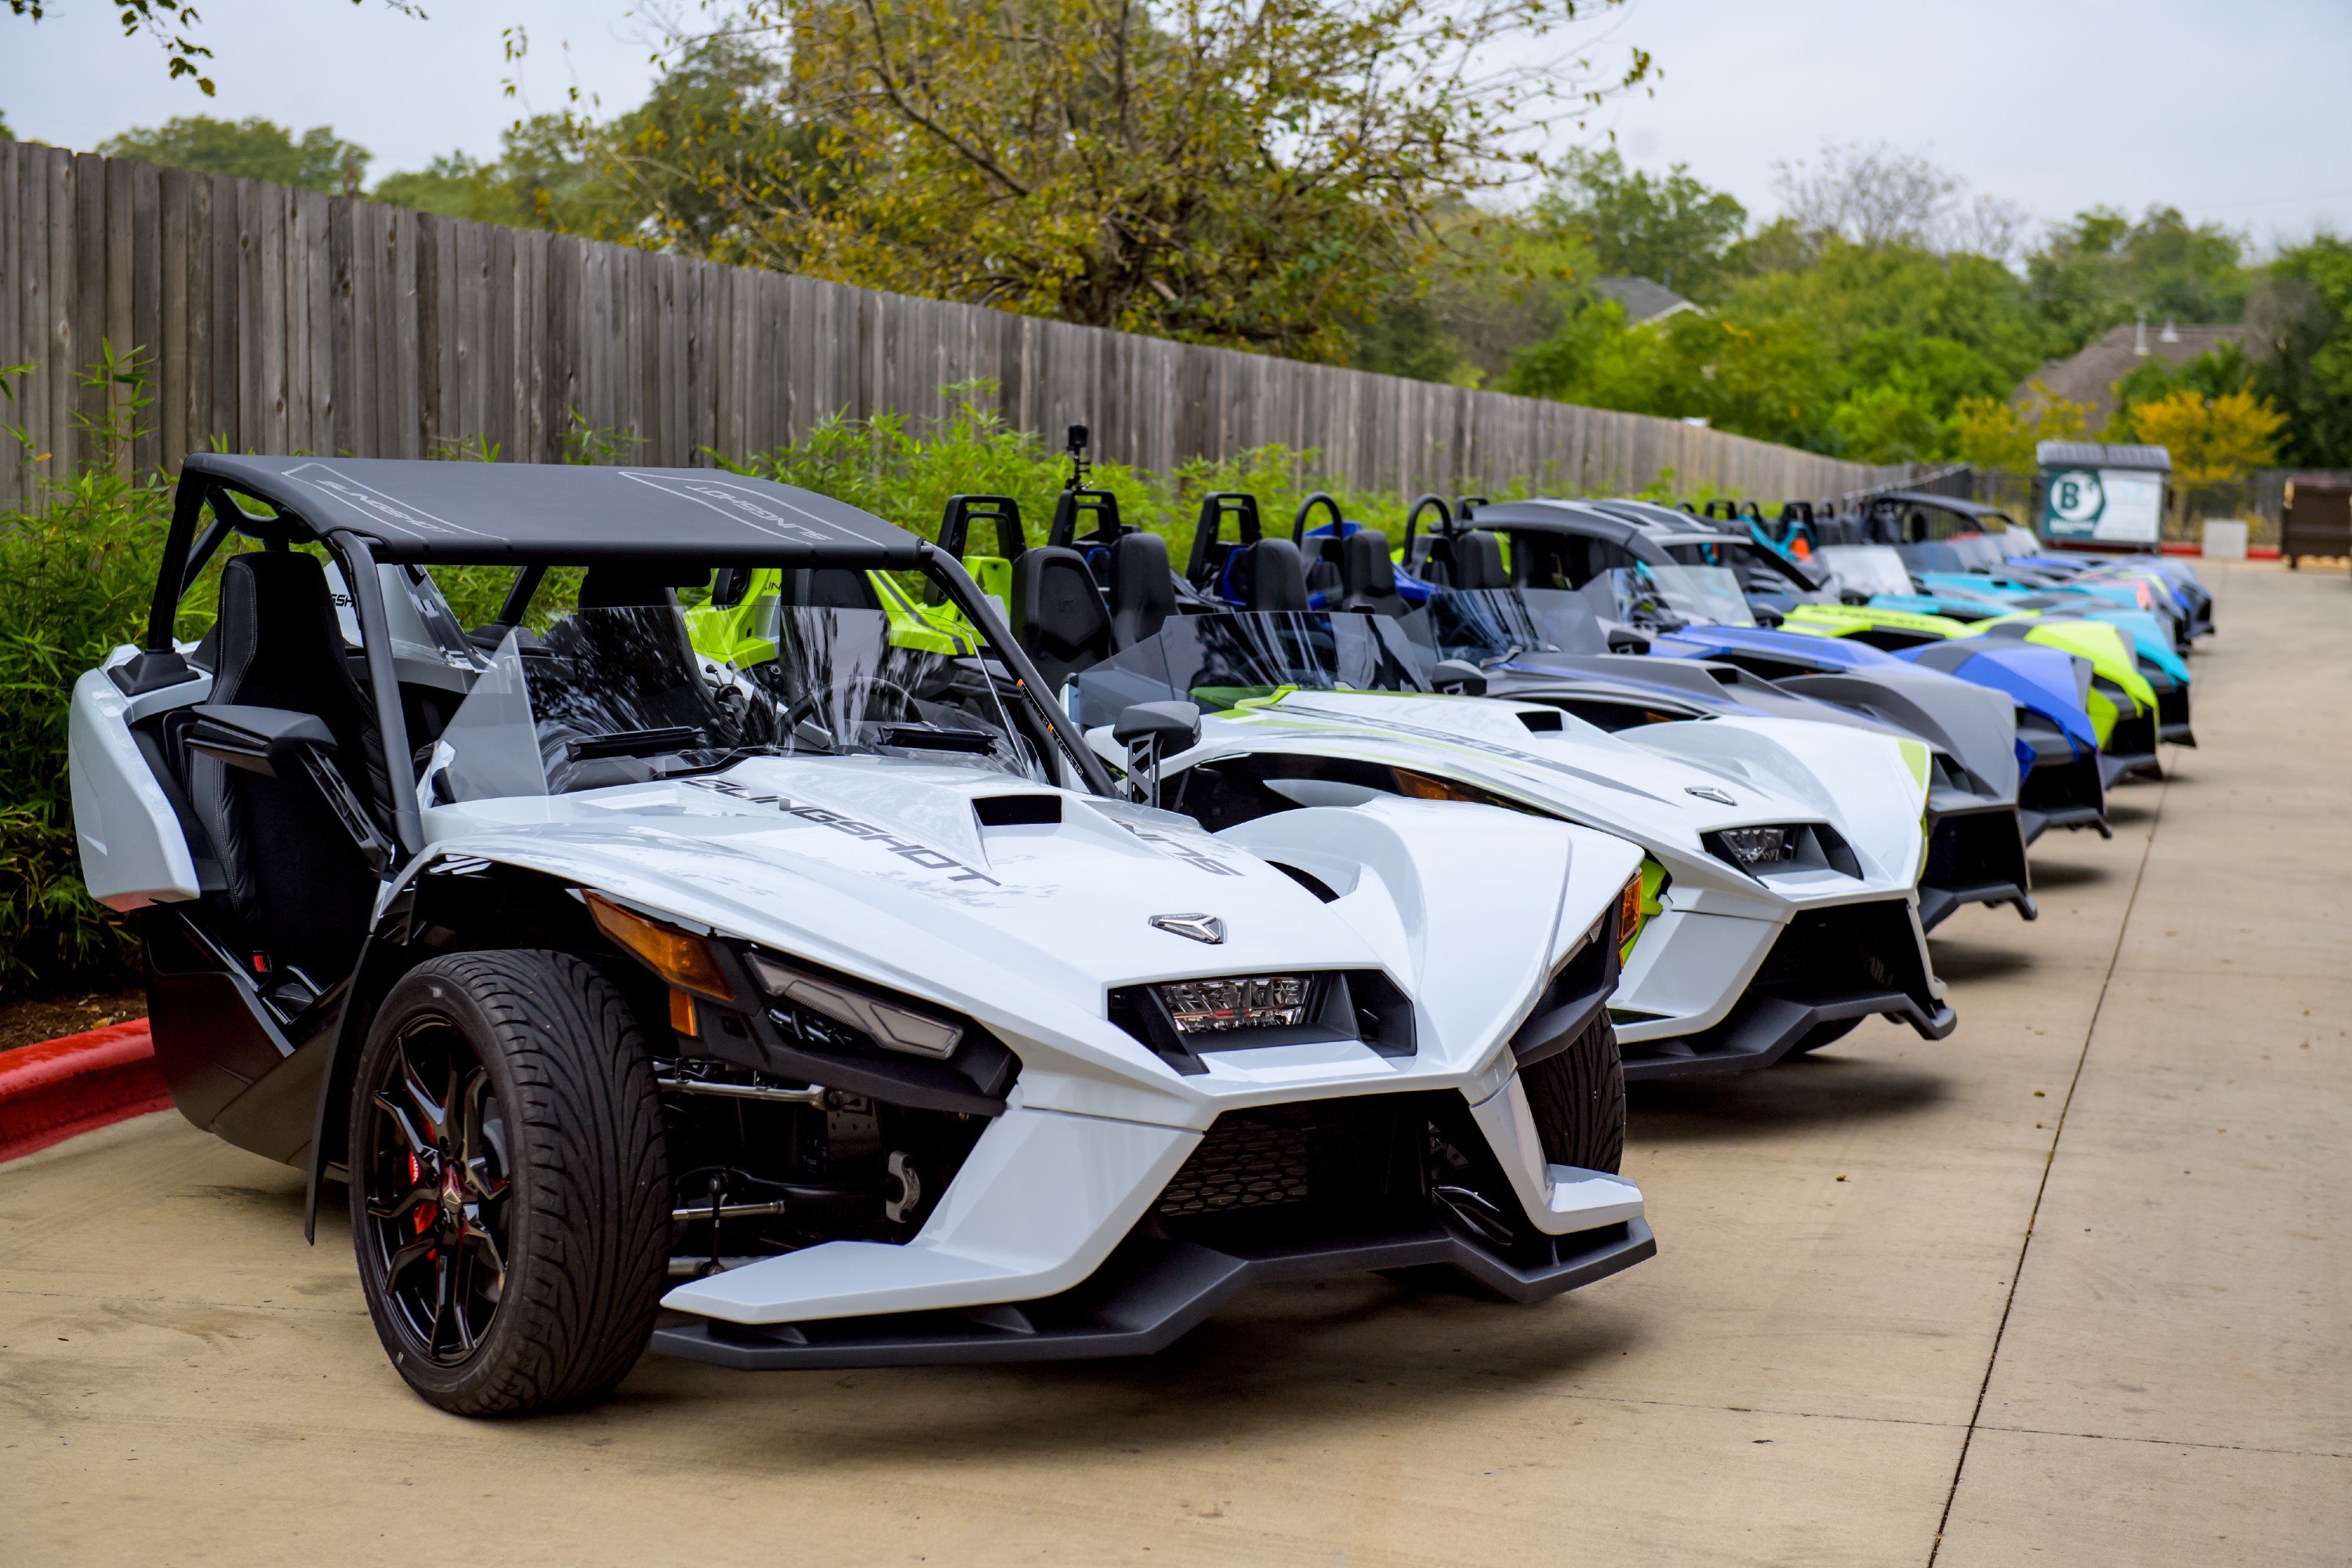 The 2023 Polaris Slingshot Lineup Invites Riders To Design The Ride Of